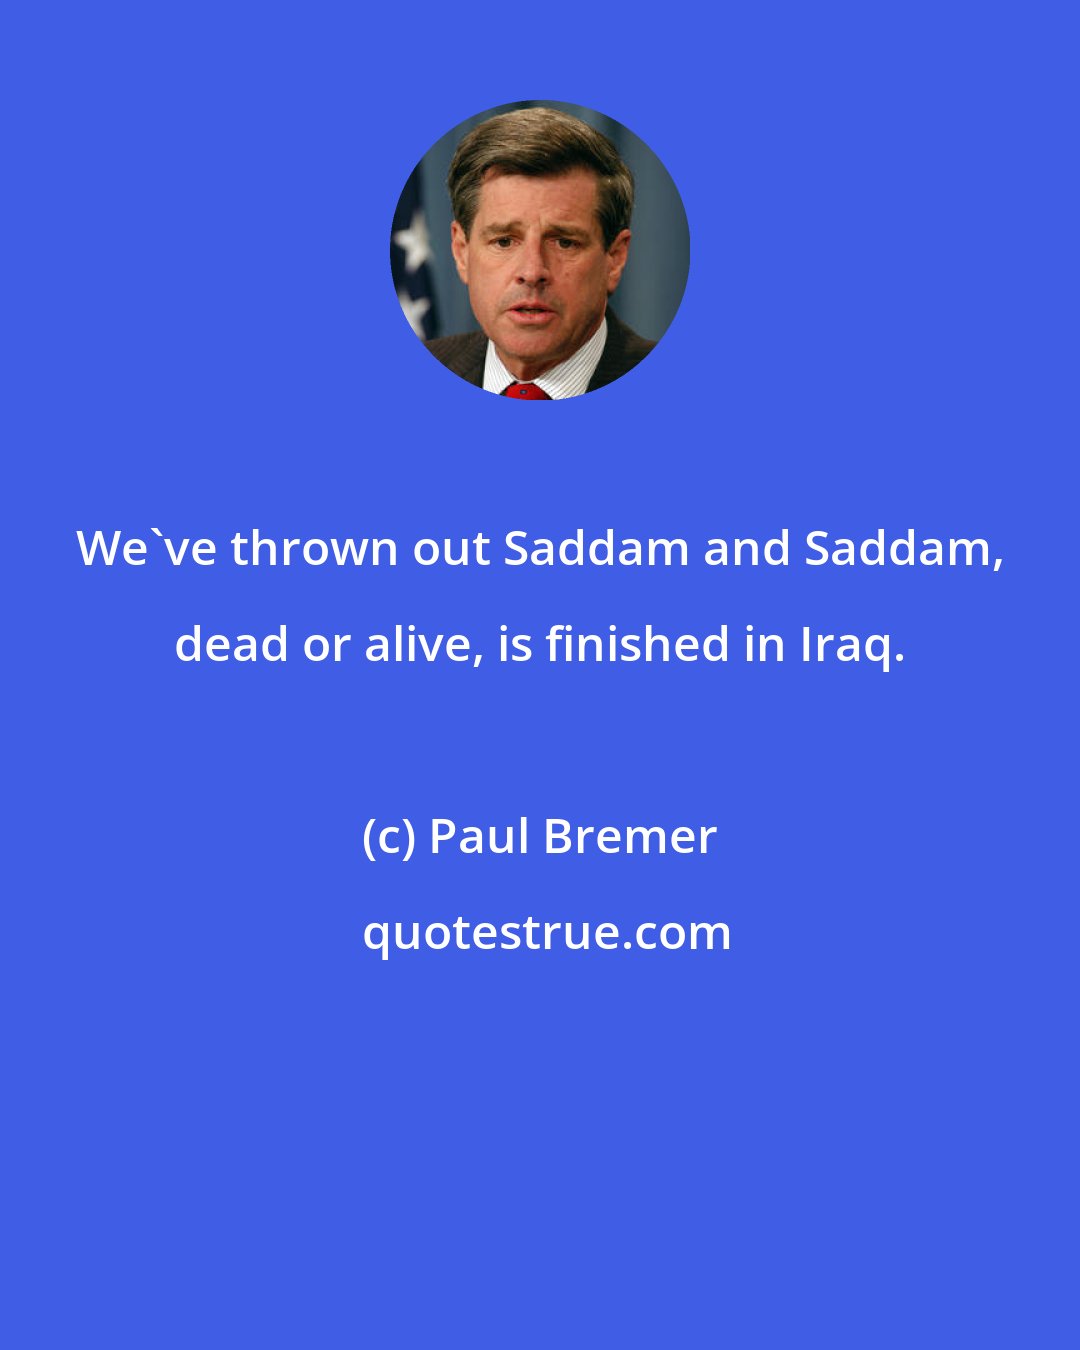 Paul Bremer: We've thrown out Saddam and Saddam, dead or alive, is finished in Iraq.